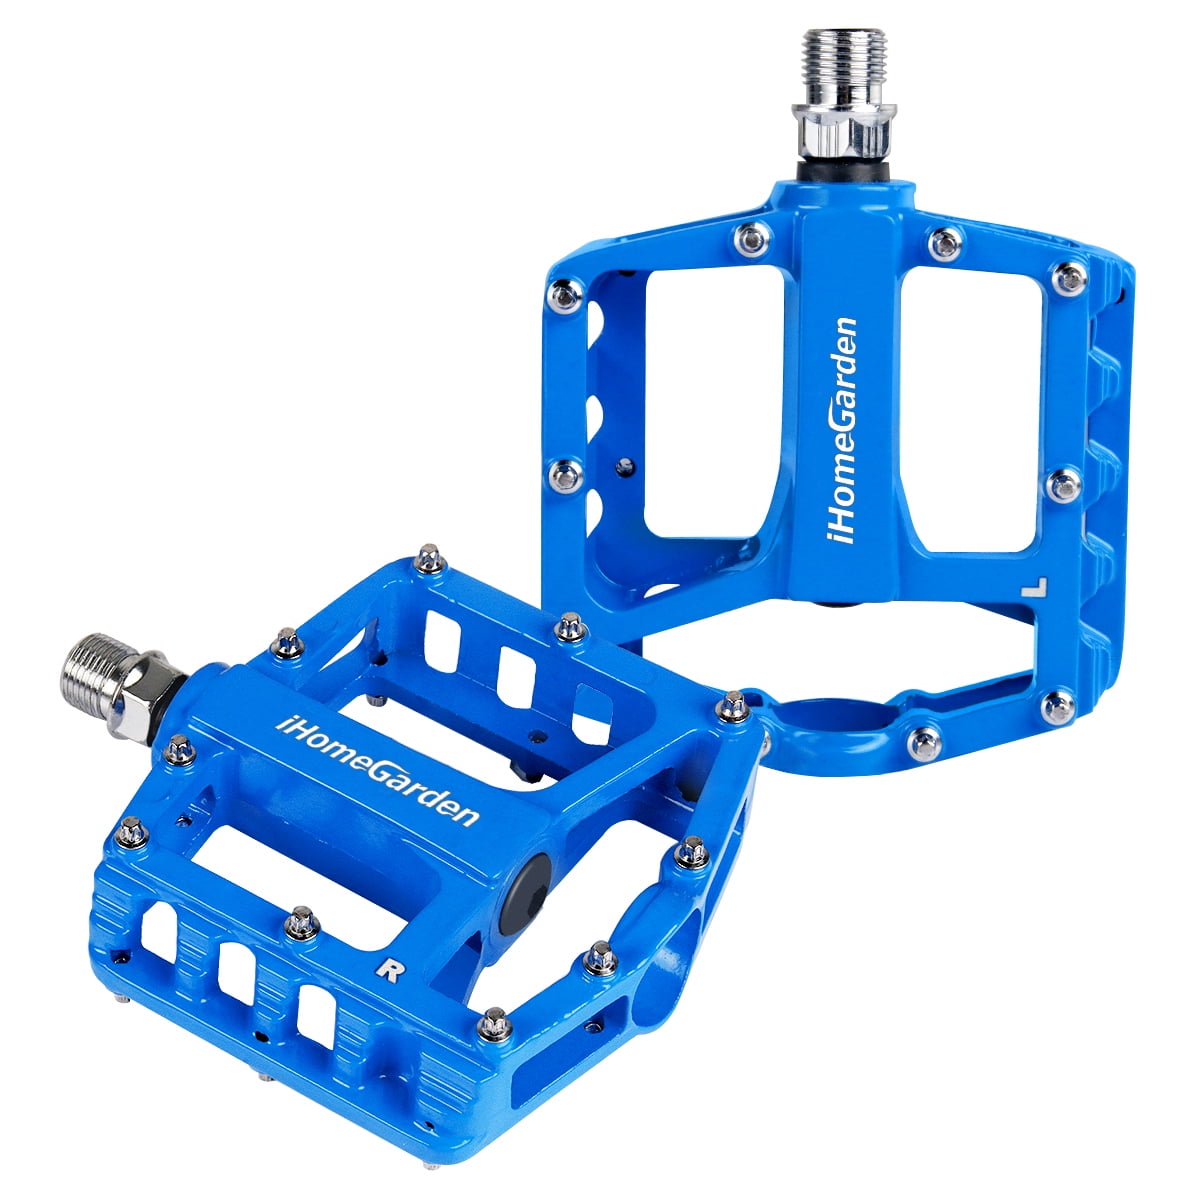 Details about   Ultralight Bike Pedals Sealed Bearing Platform MTB Bicycle Pedals GK 